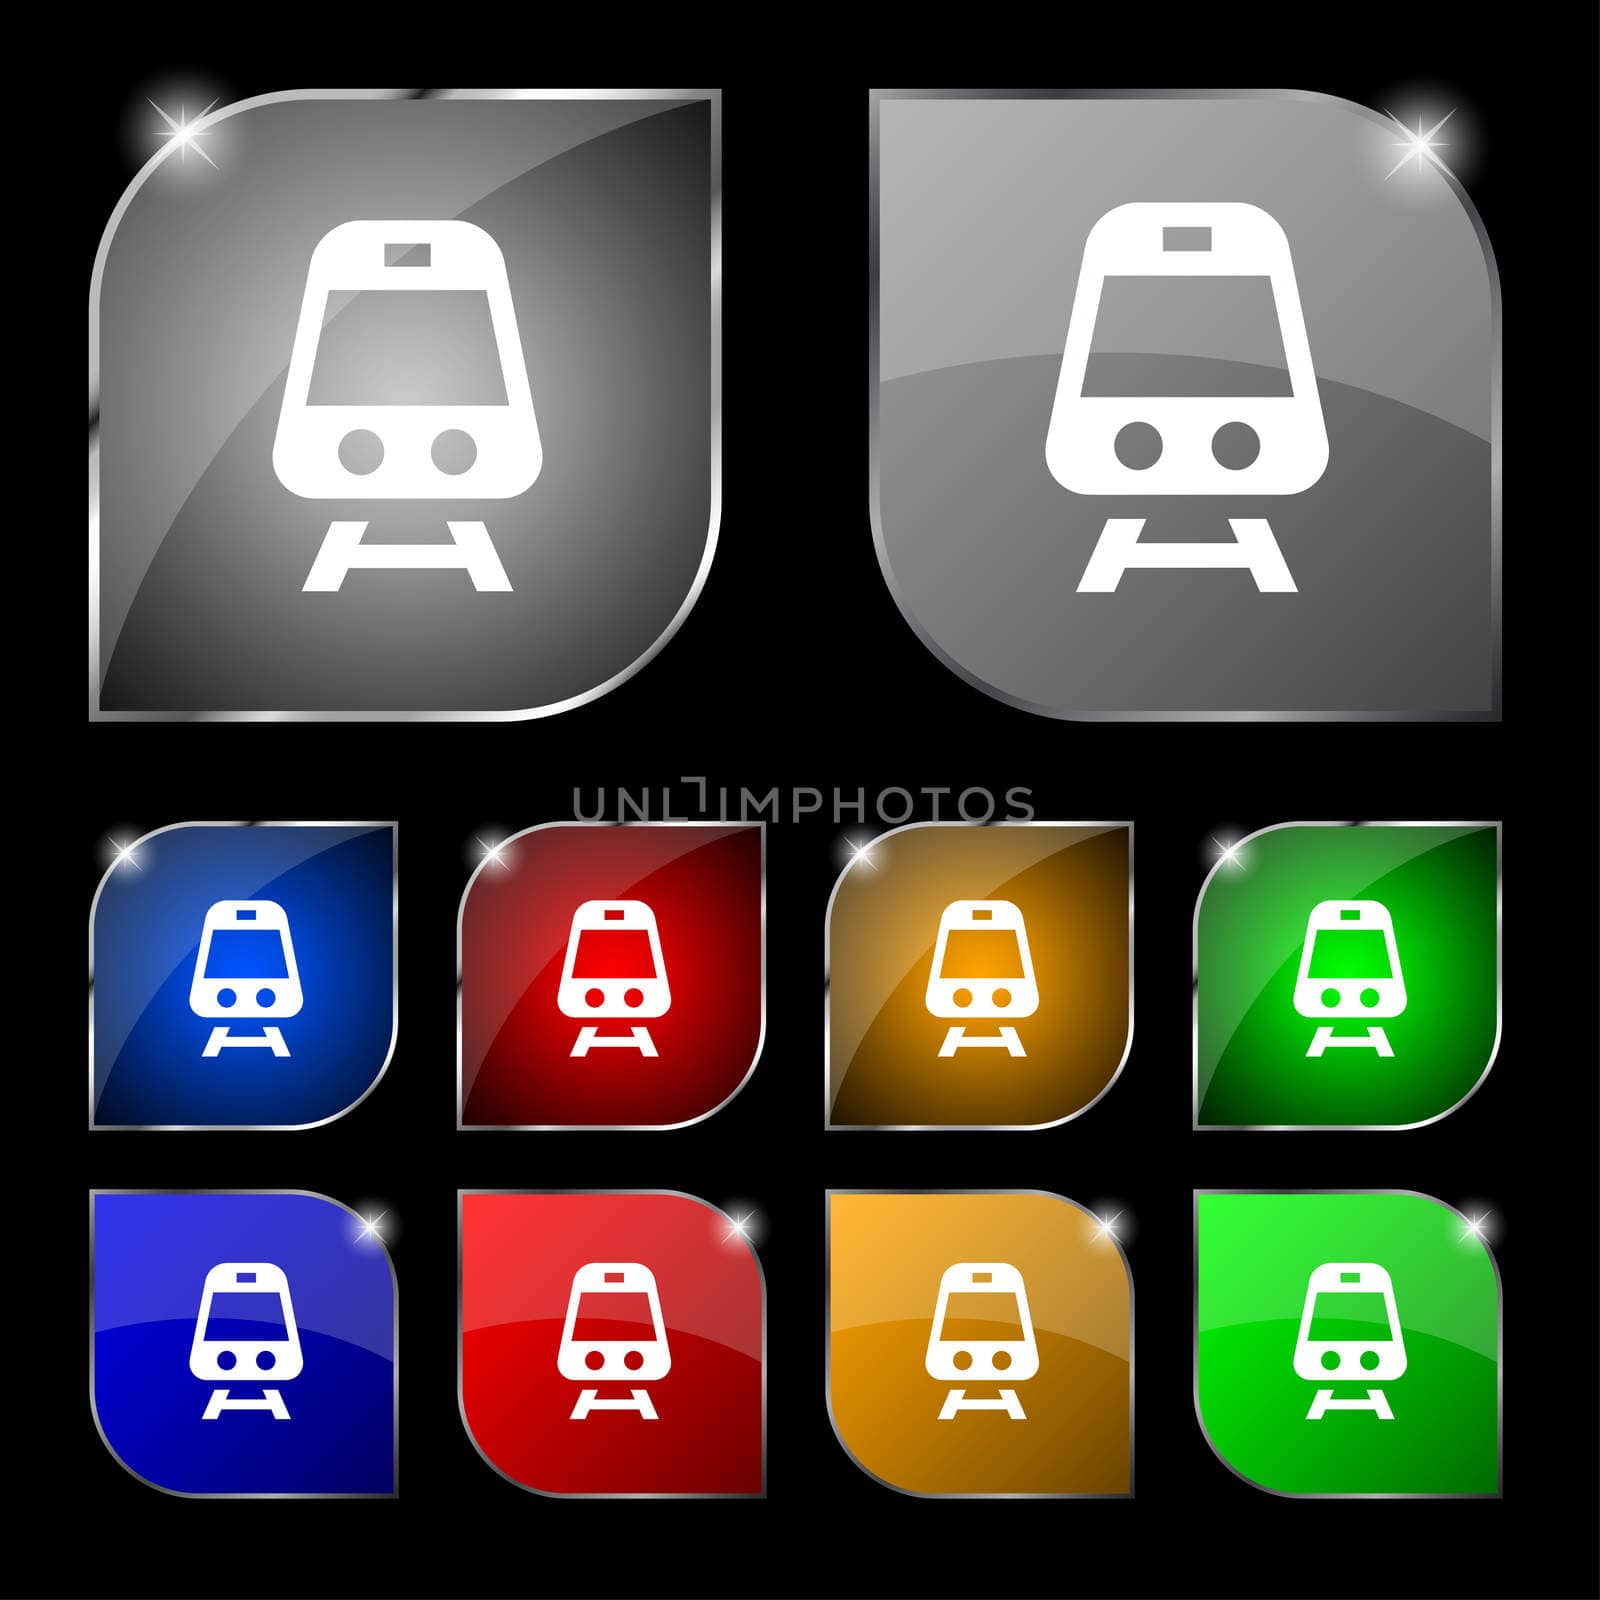 Train icon sign. Set of ten colorful buttons with glare. illustration